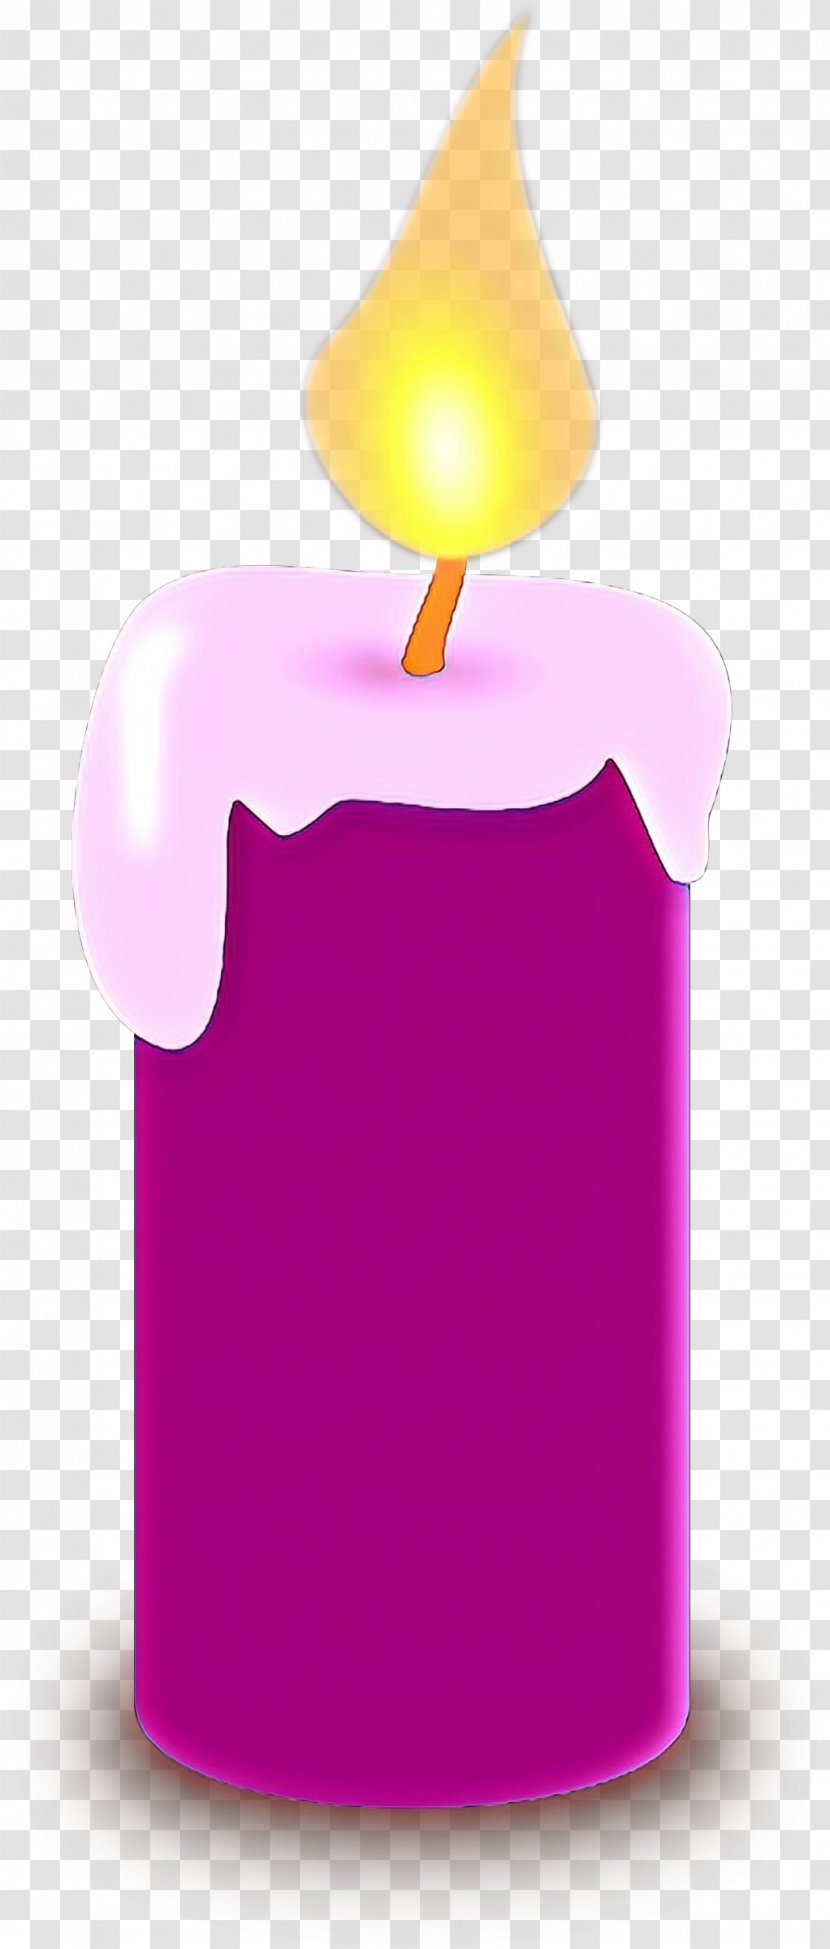 Wax Flameless Candle Lighting Product Design - Violet - Purple Transparent PNG